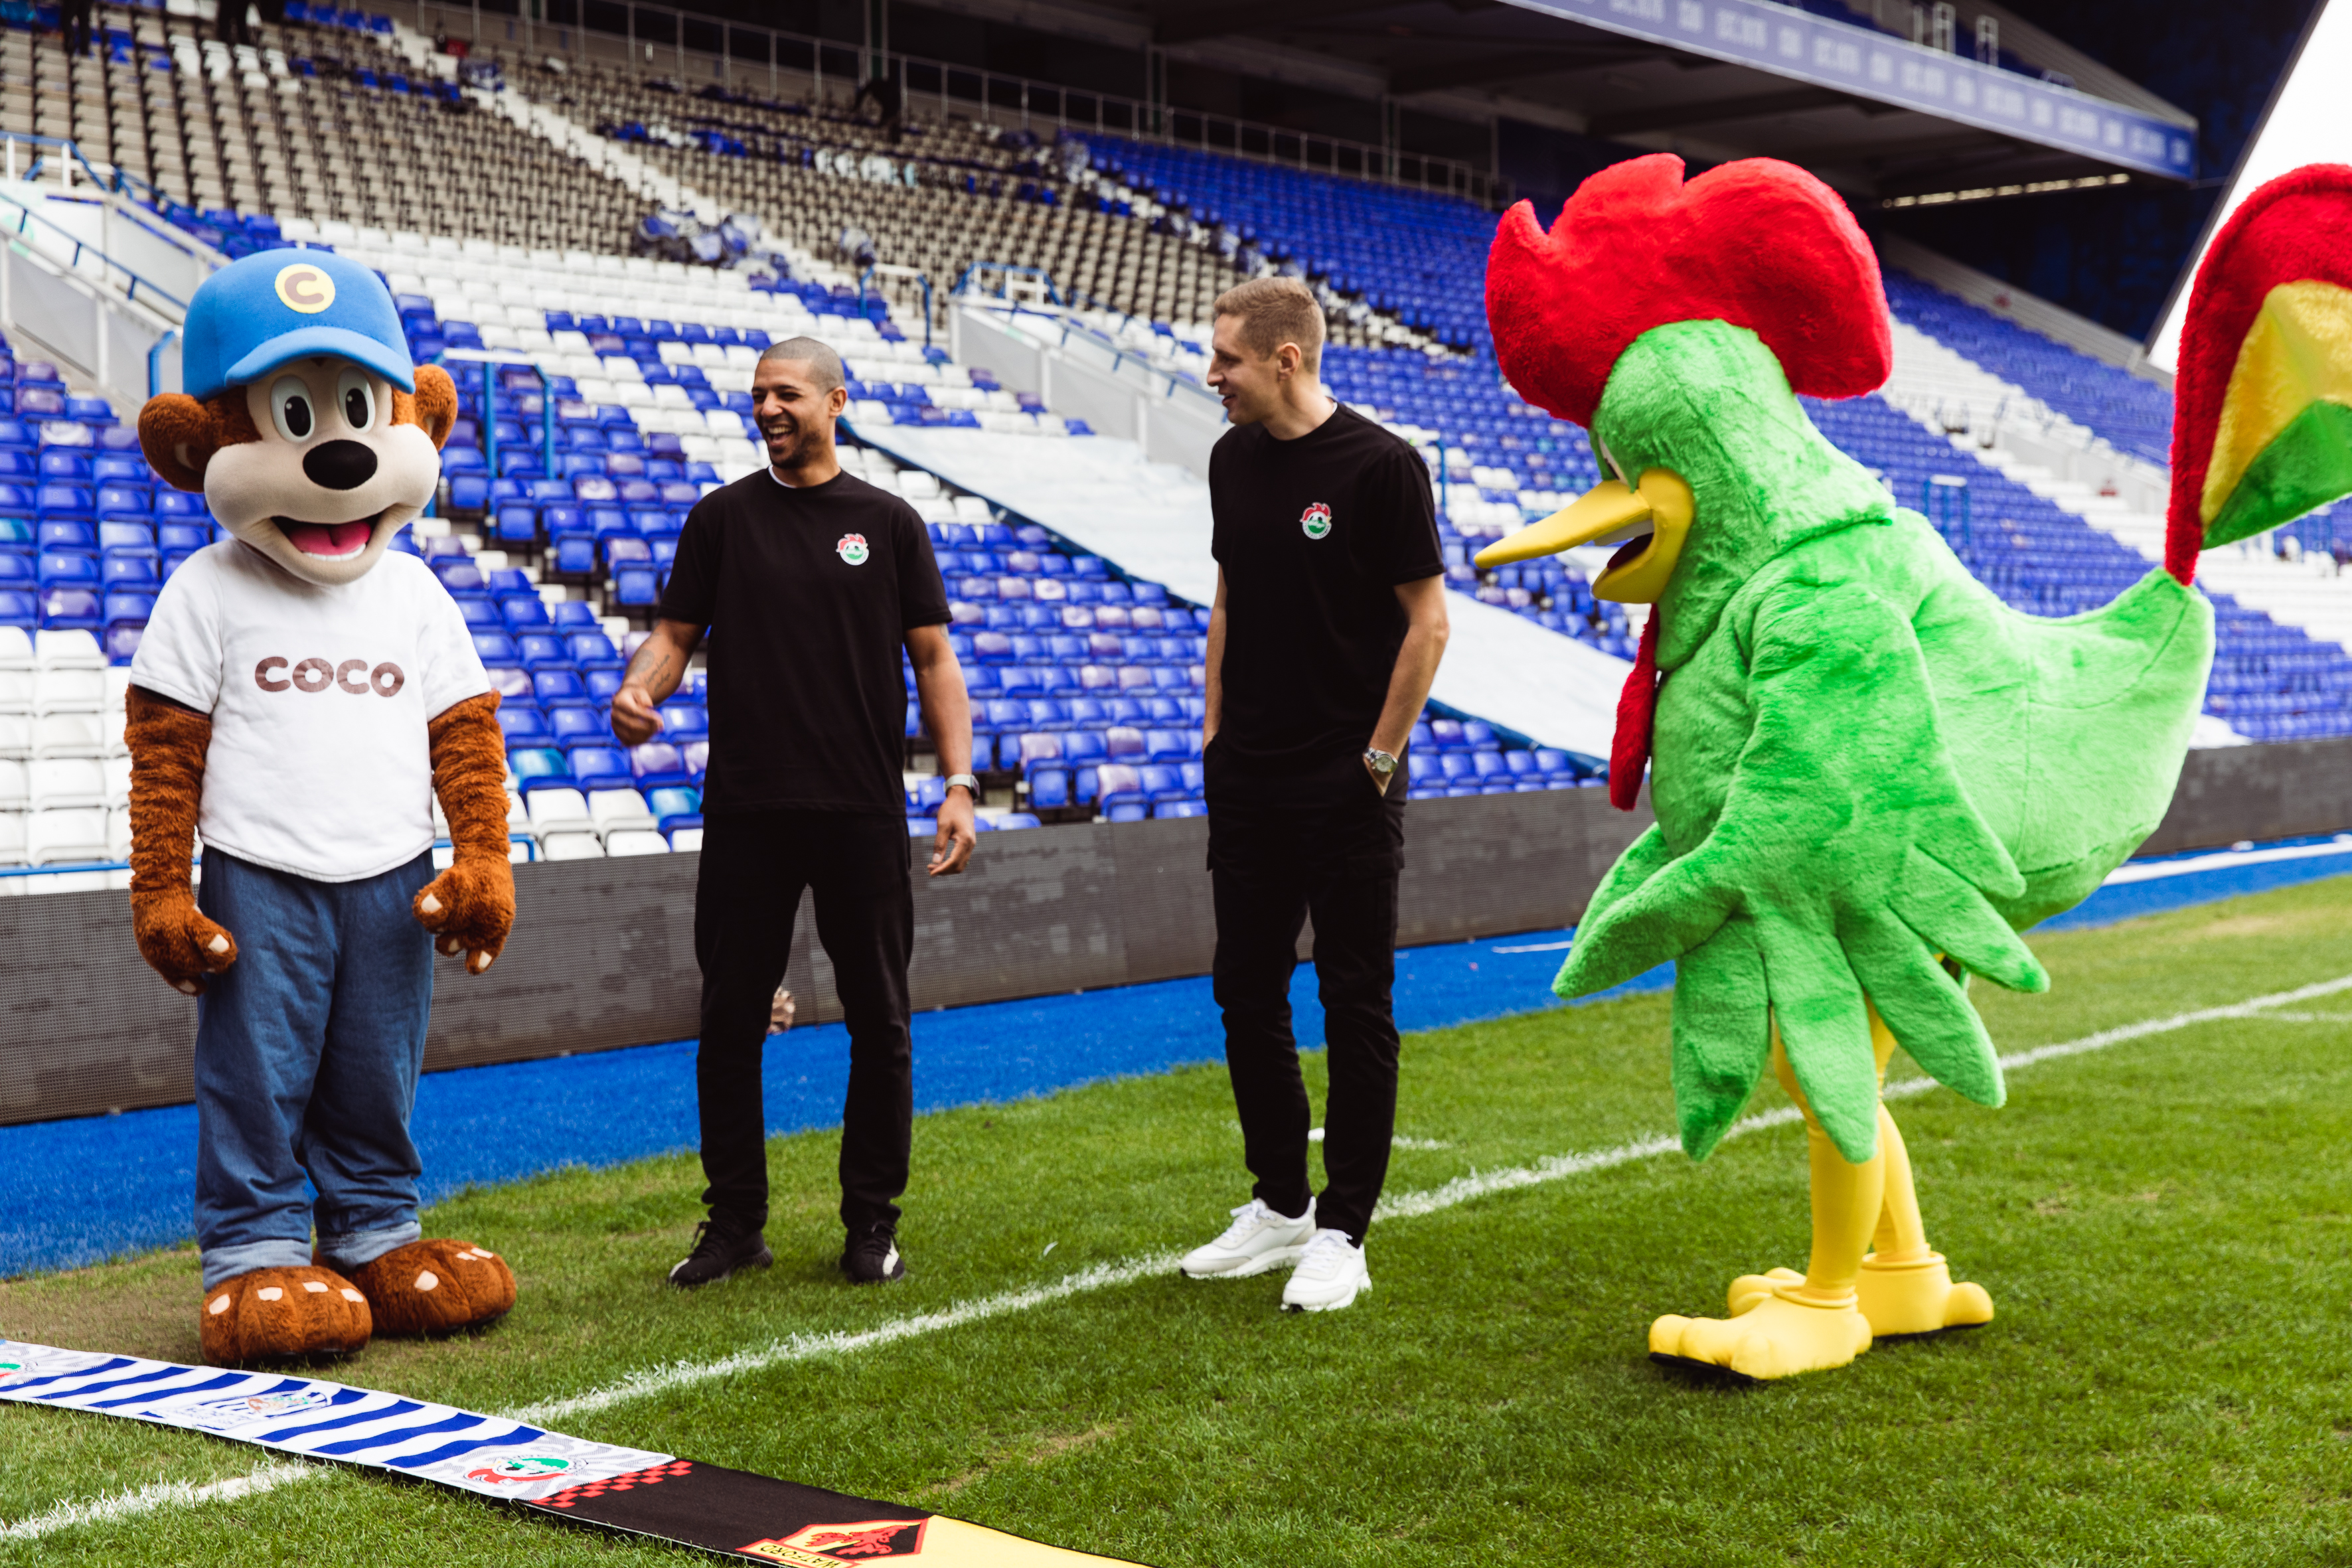 Kelloggs & Coco Pops mascots engaging with two player.